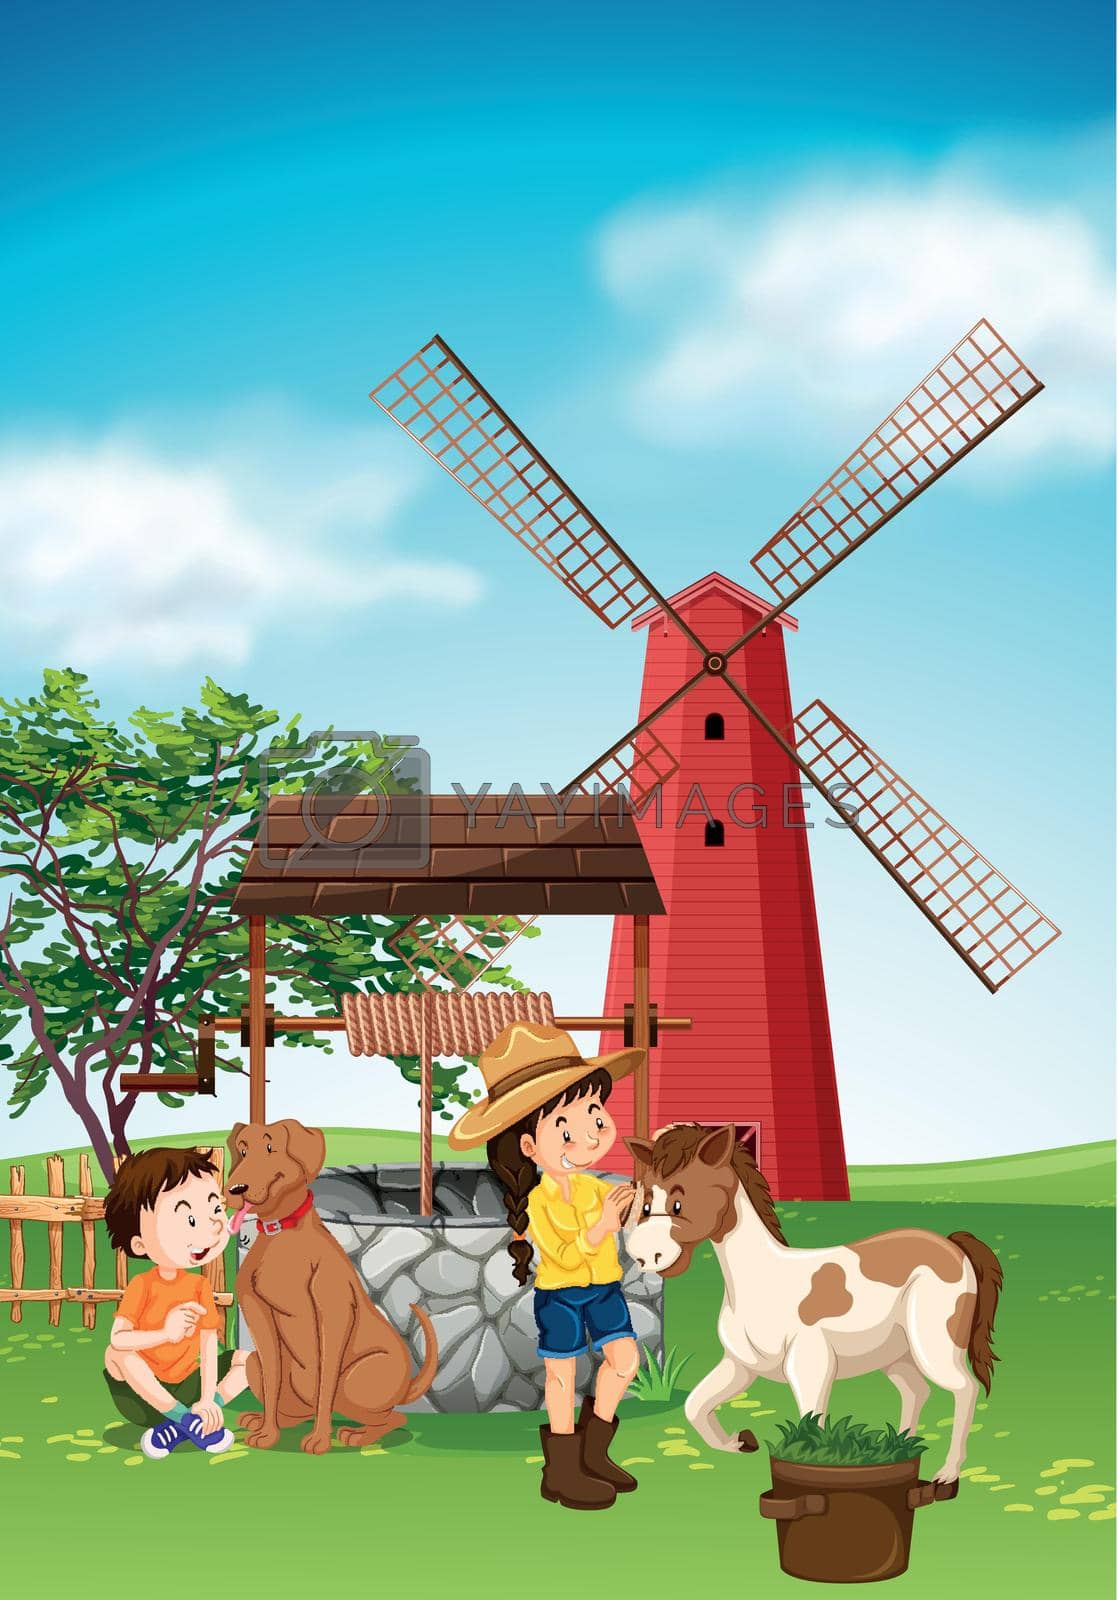 Kids and animals in the farmyard illustration